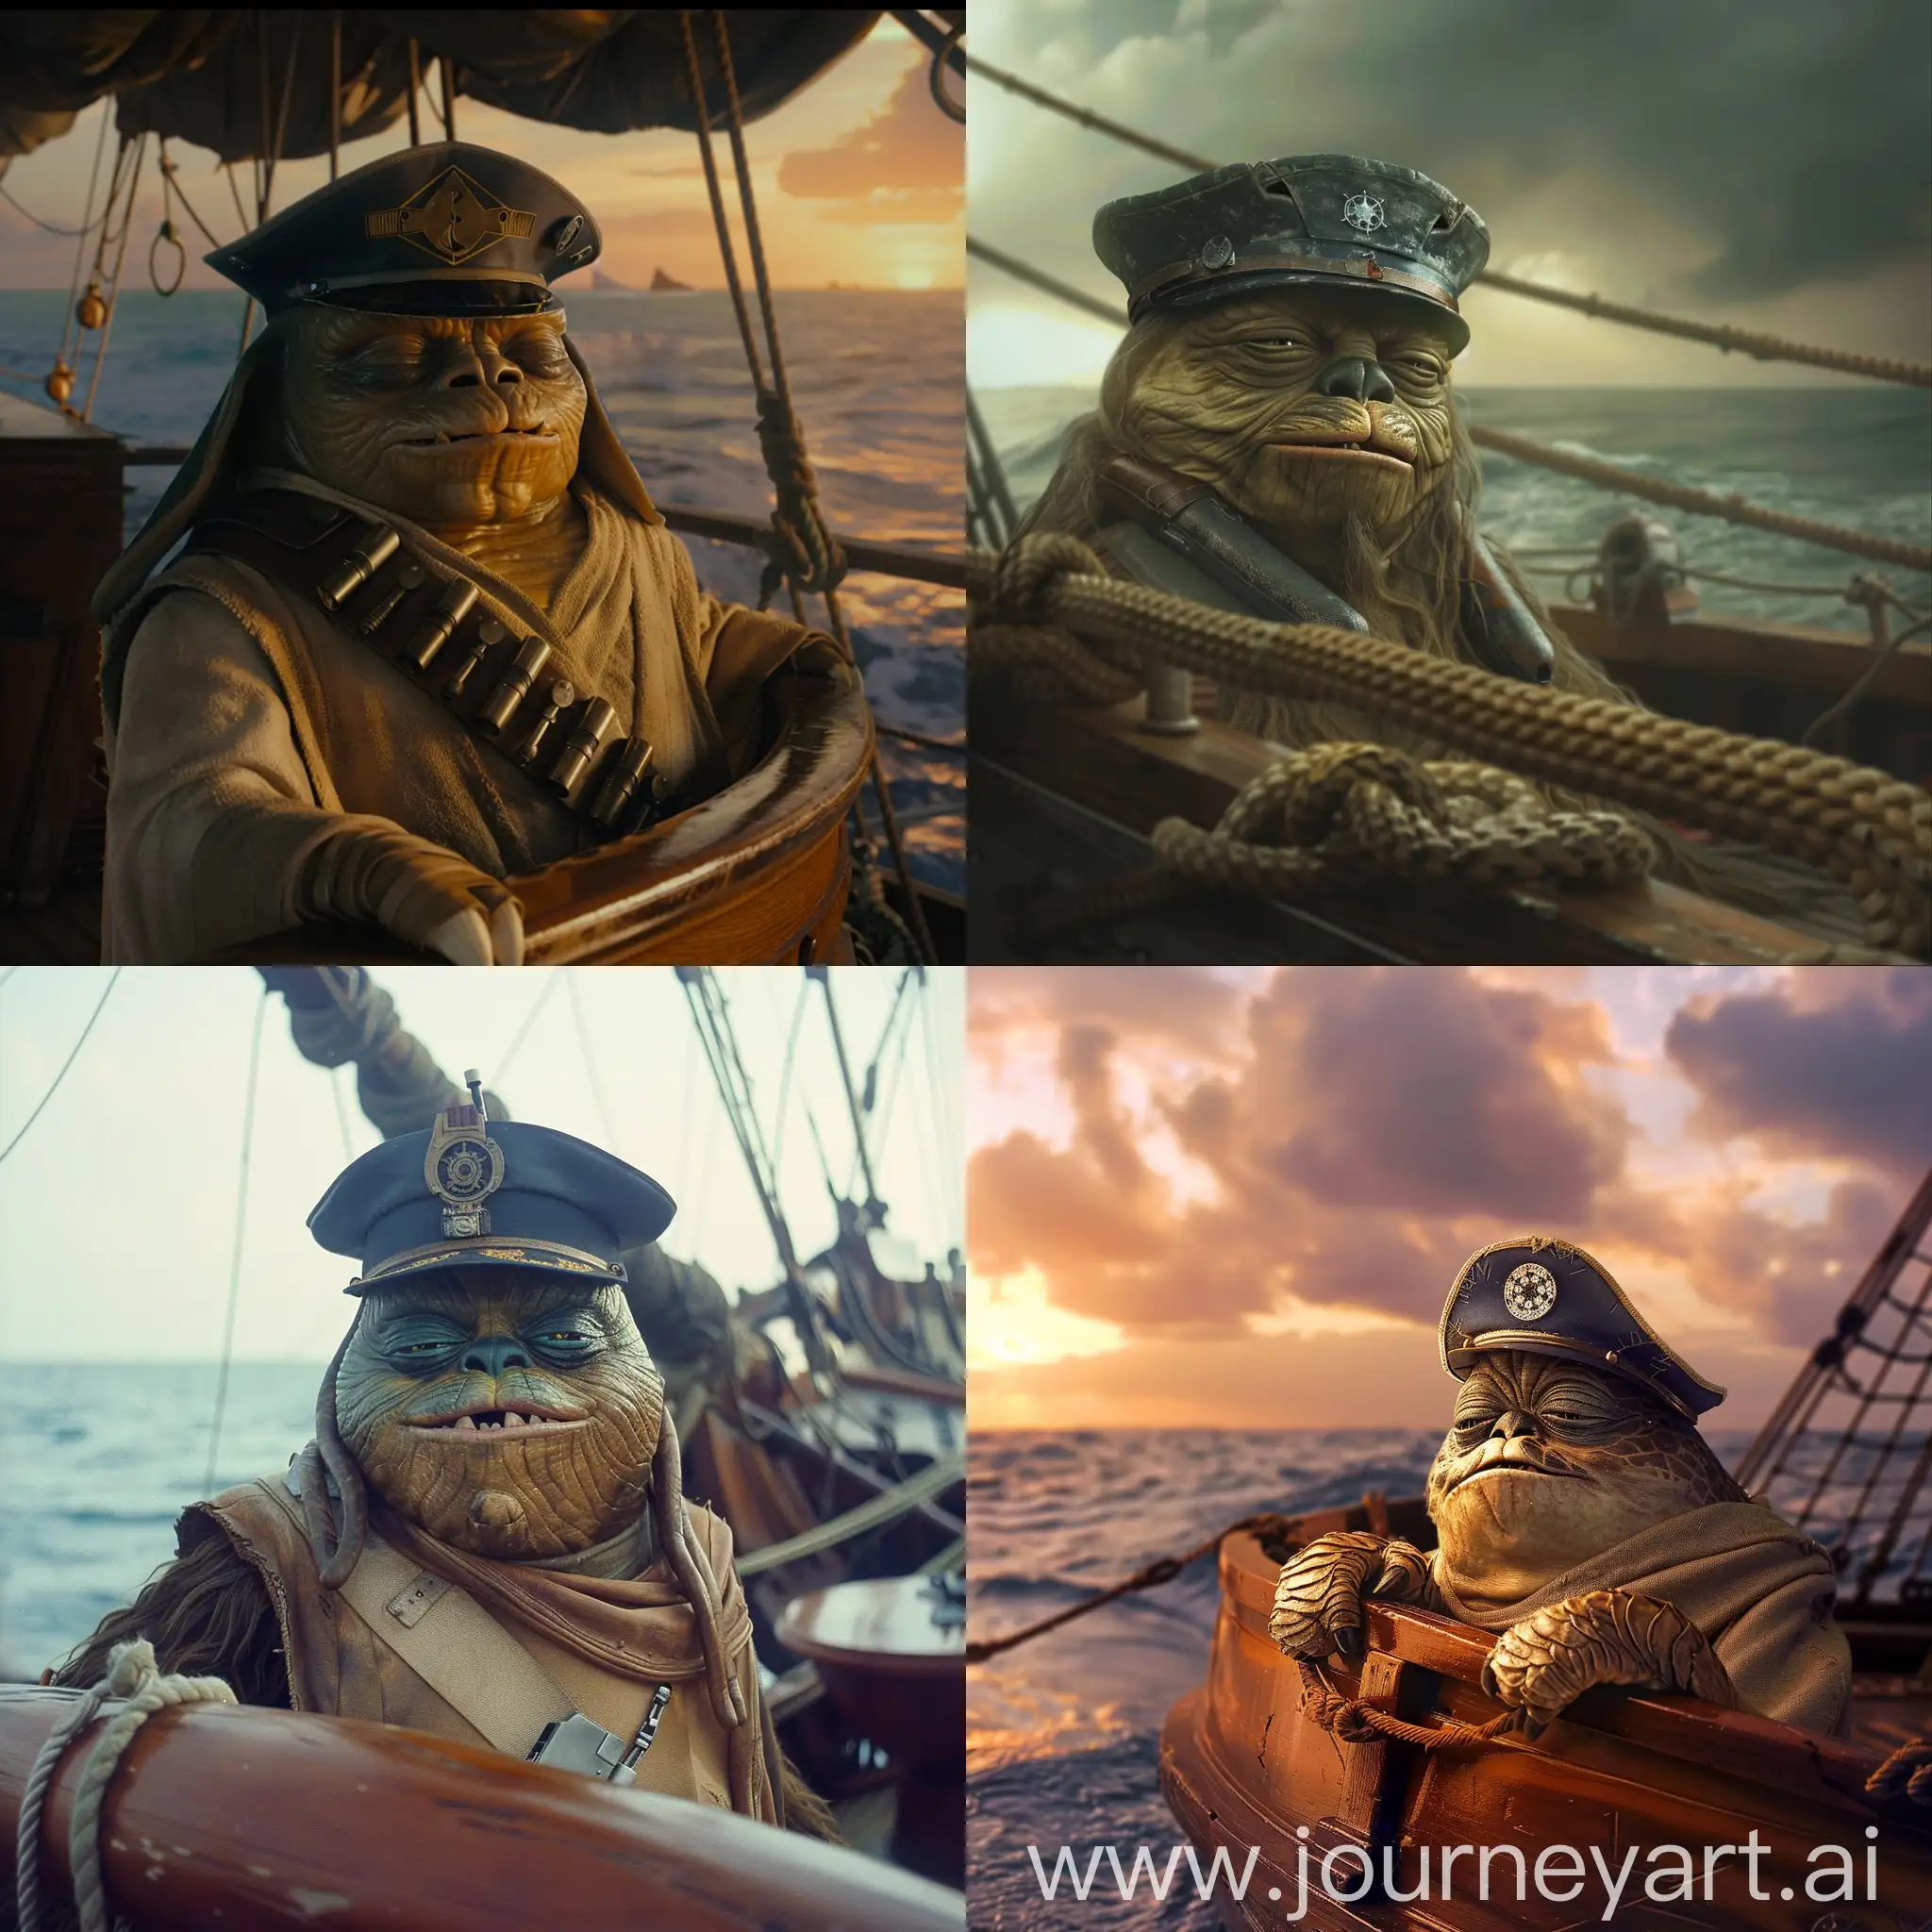 Jabba-the-Hutt-Wearing-Captains-Hat-Aboard-Ship-at-Sea